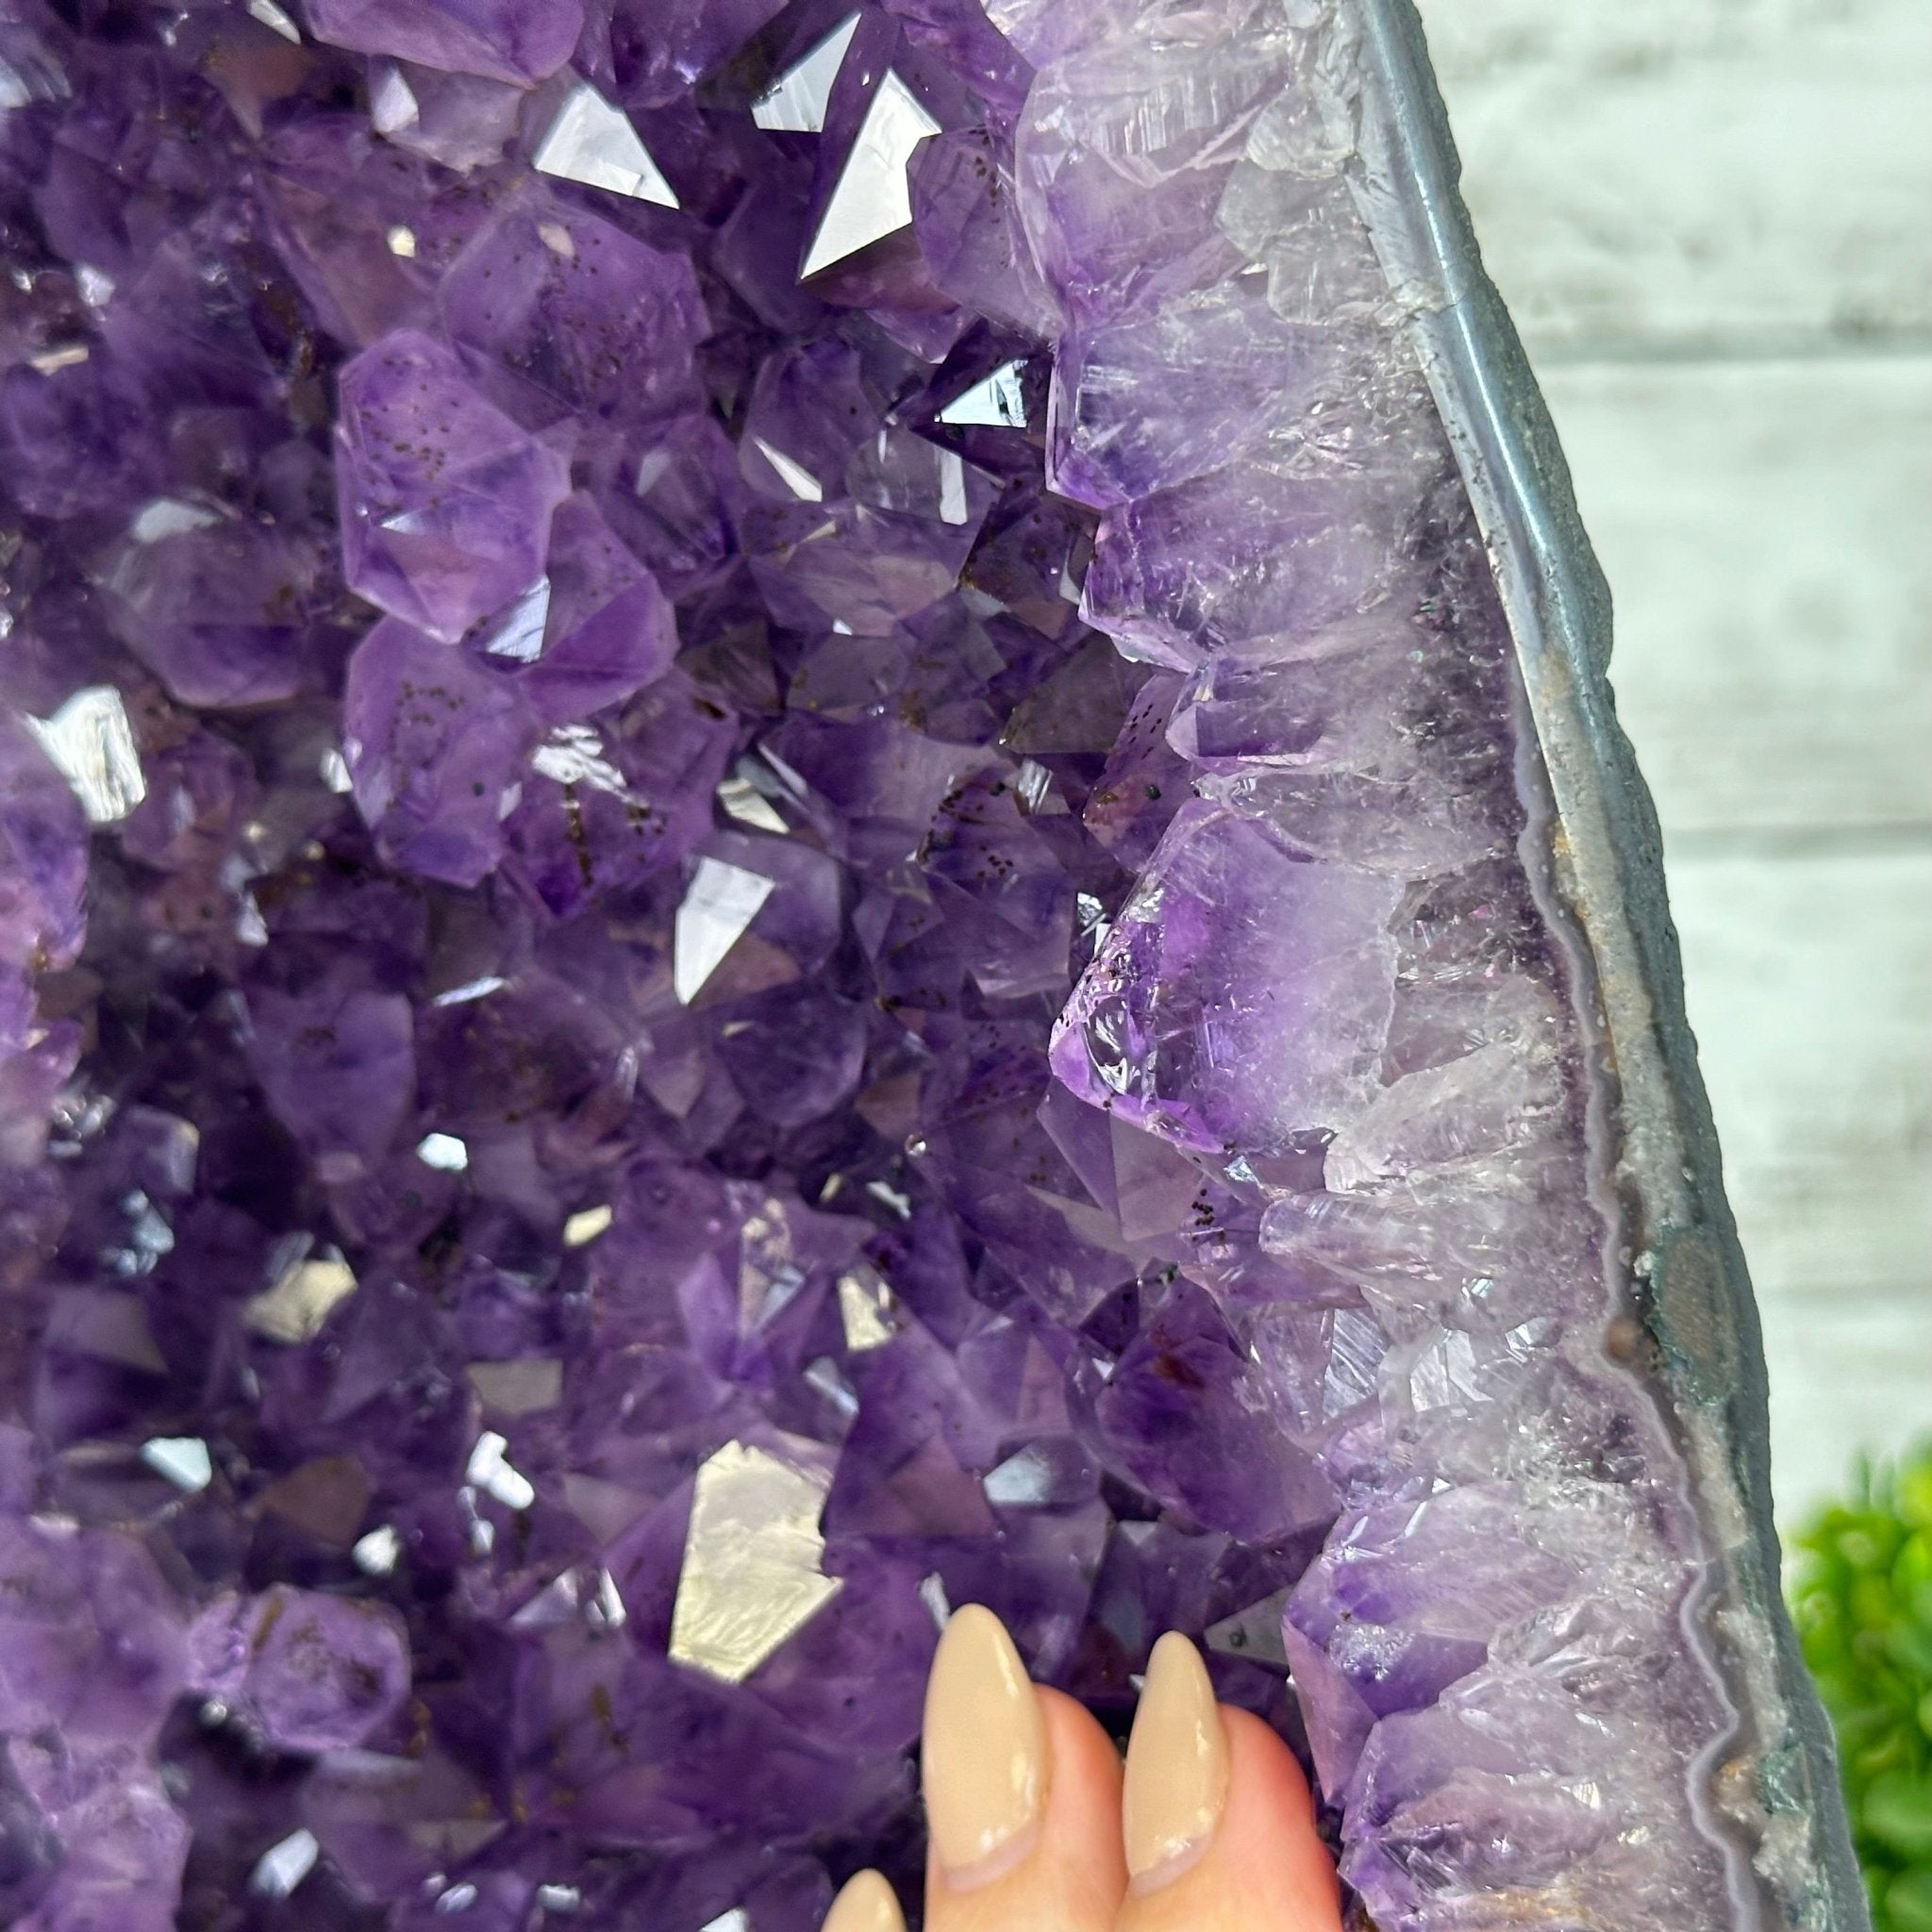 Quality Brazilian Amethyst Cathedral, 24.1 lbs & 17.9" Tall, #5601 - 1394 - Brazil GemsBrazil GemsQuality Brazilian Amethyst Cathedral, 24.1 lbs & 17.9" Tall, #5601 - 1394Cathedrals5601 - 1394